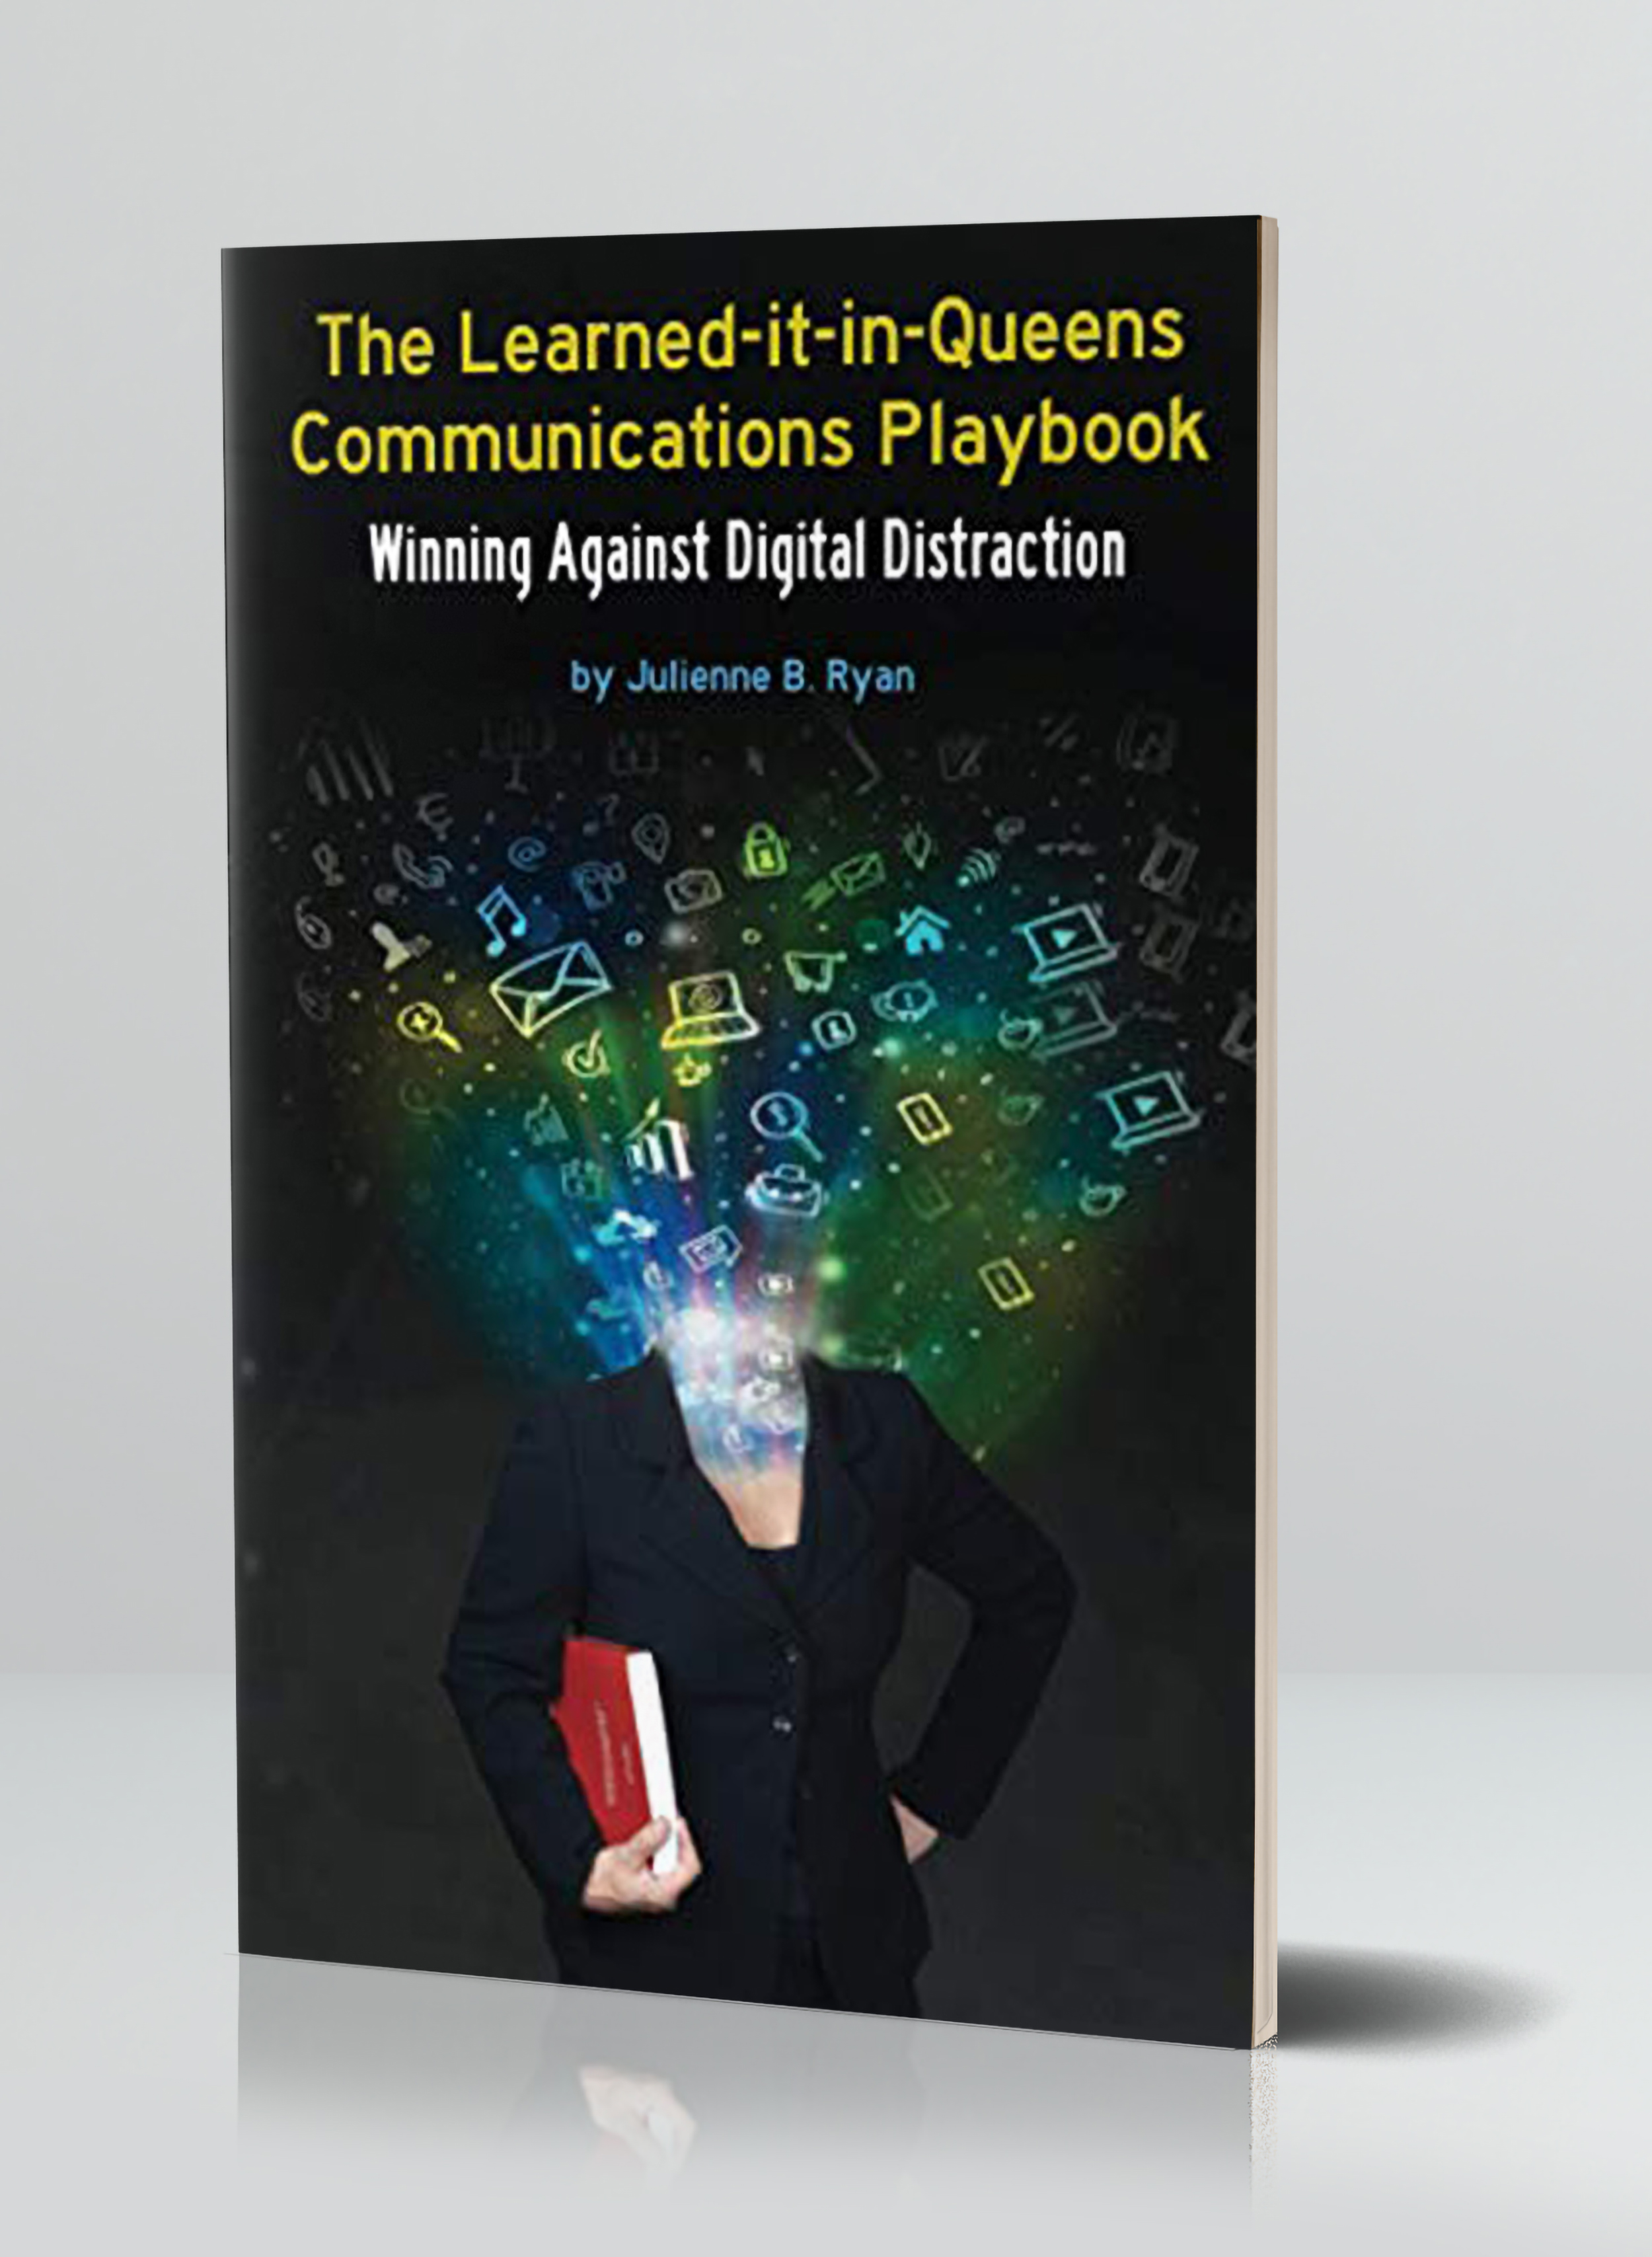 Renowned Communications Expert Julienne Ryan Releases Second Edition of "The Learned-It-in-Queens Communications Playbook: Winning Against Digital Distraction"